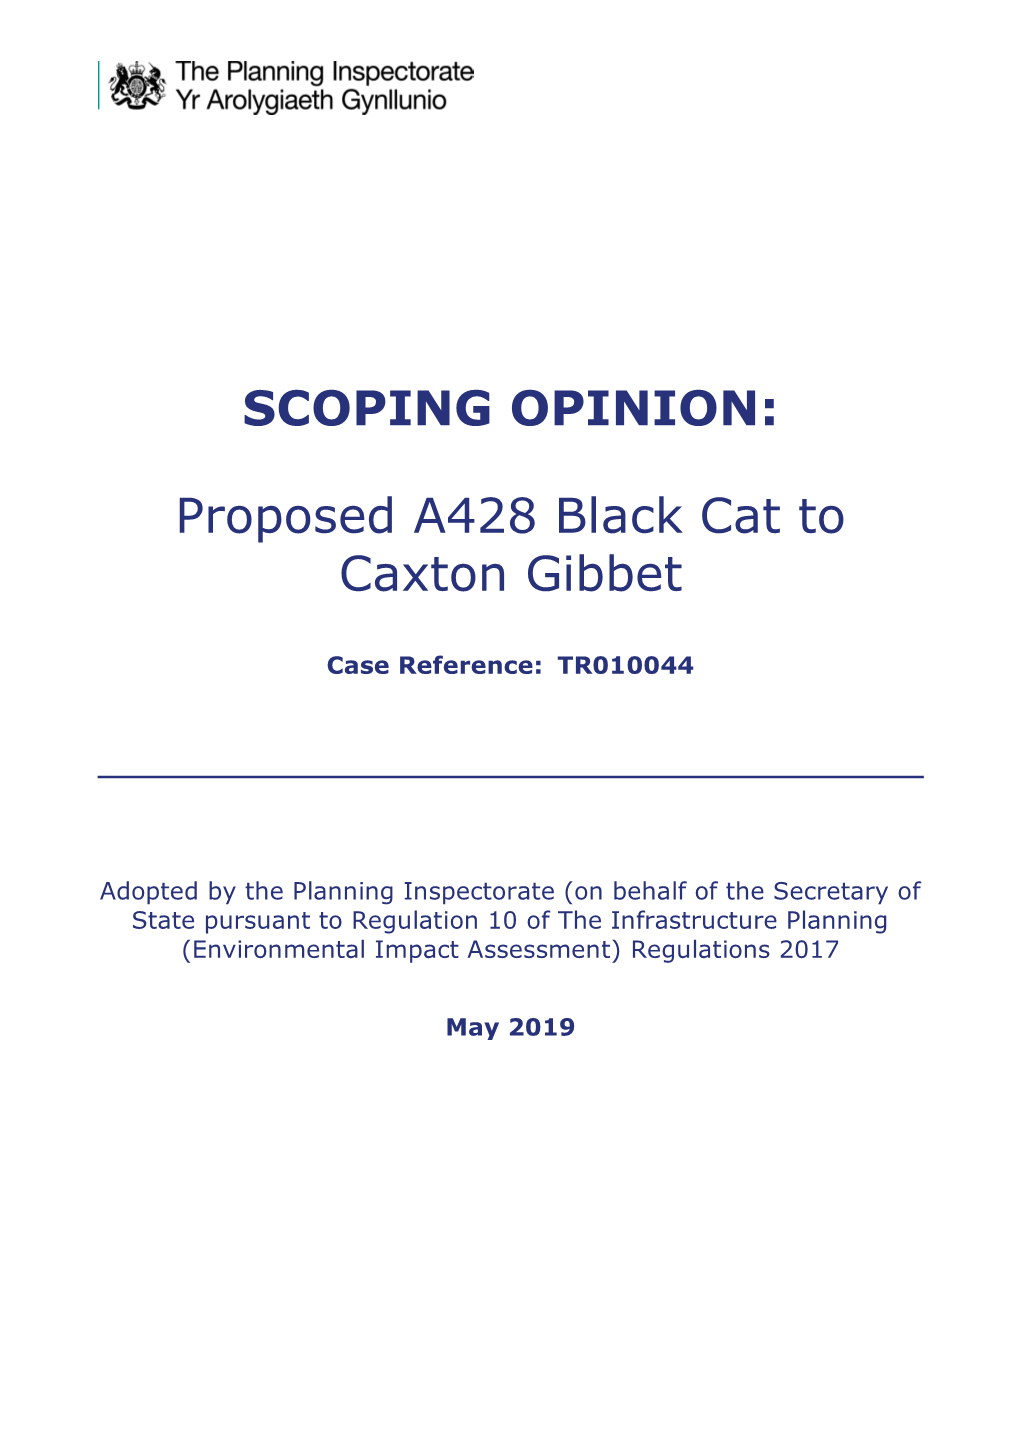 SCOPING OPINION: Proposed A428 Black Cat to Caxton Gibbet